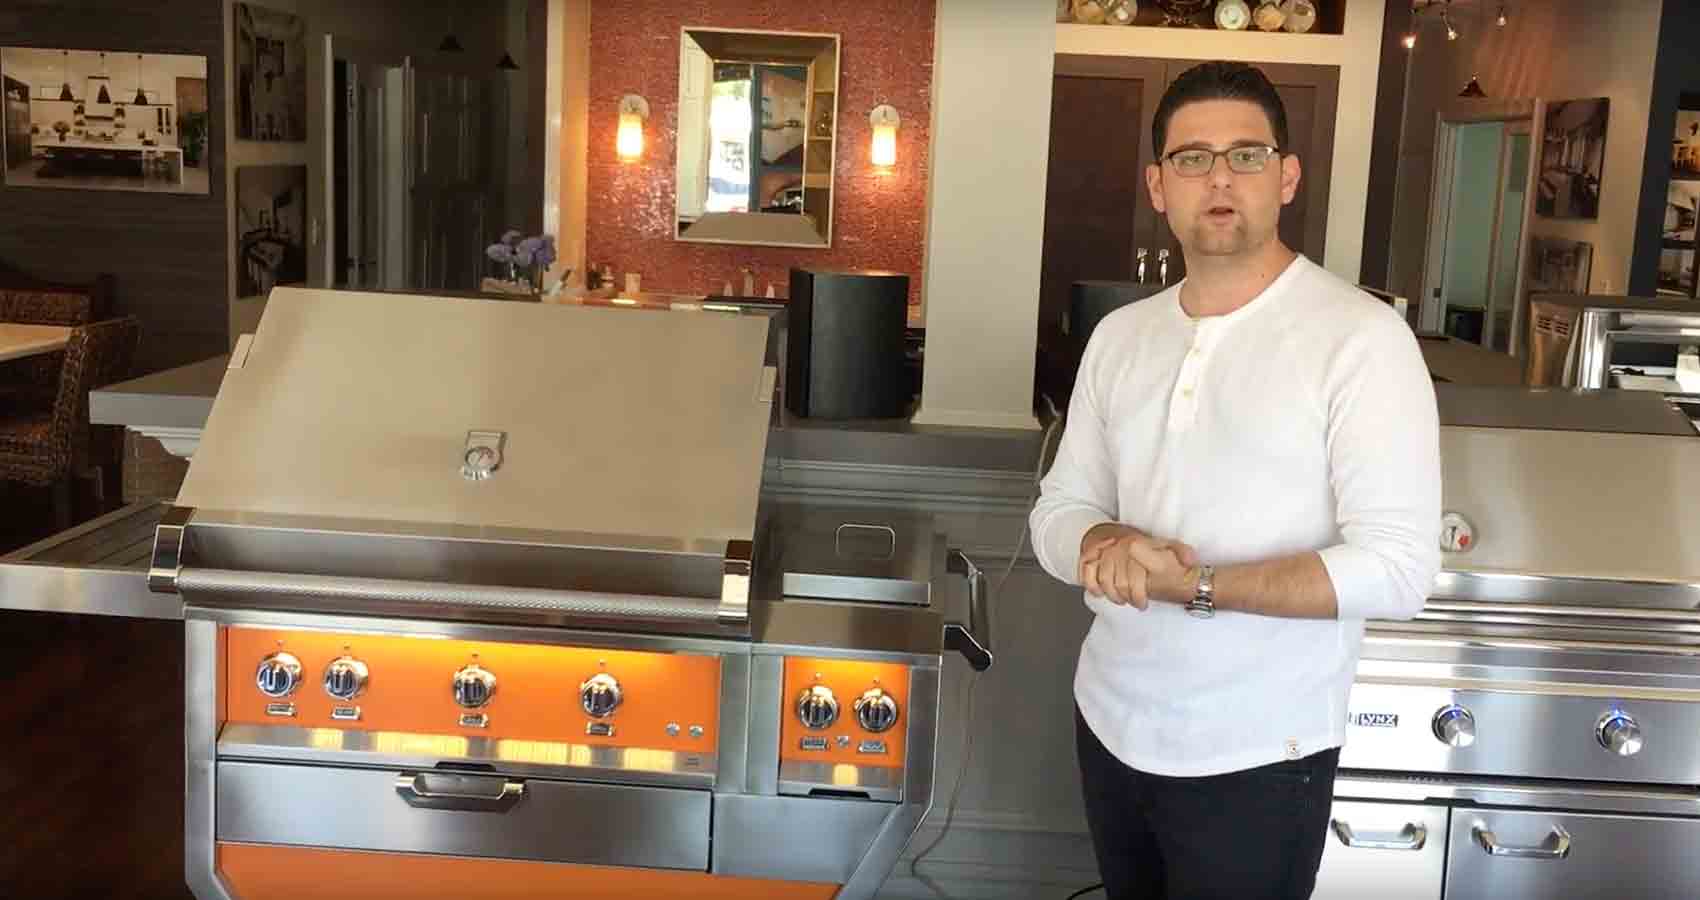 Hestan-Grill-Review-from-Appliance-Buyer’s-Guide